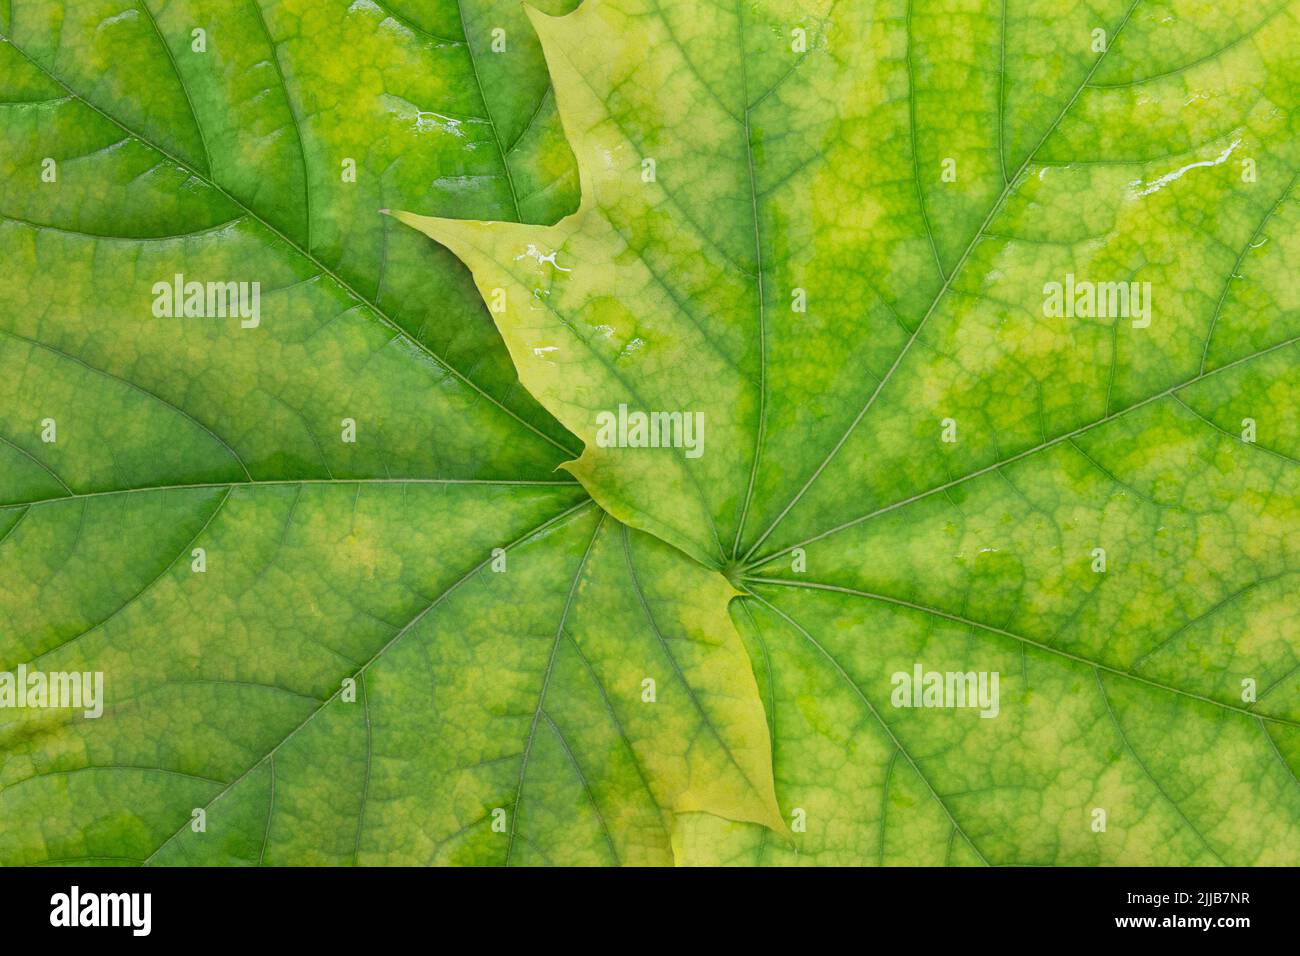 Maple yellow green leaves close-up. Natural background. Horizontal and vertical. Copy space Stock Photo